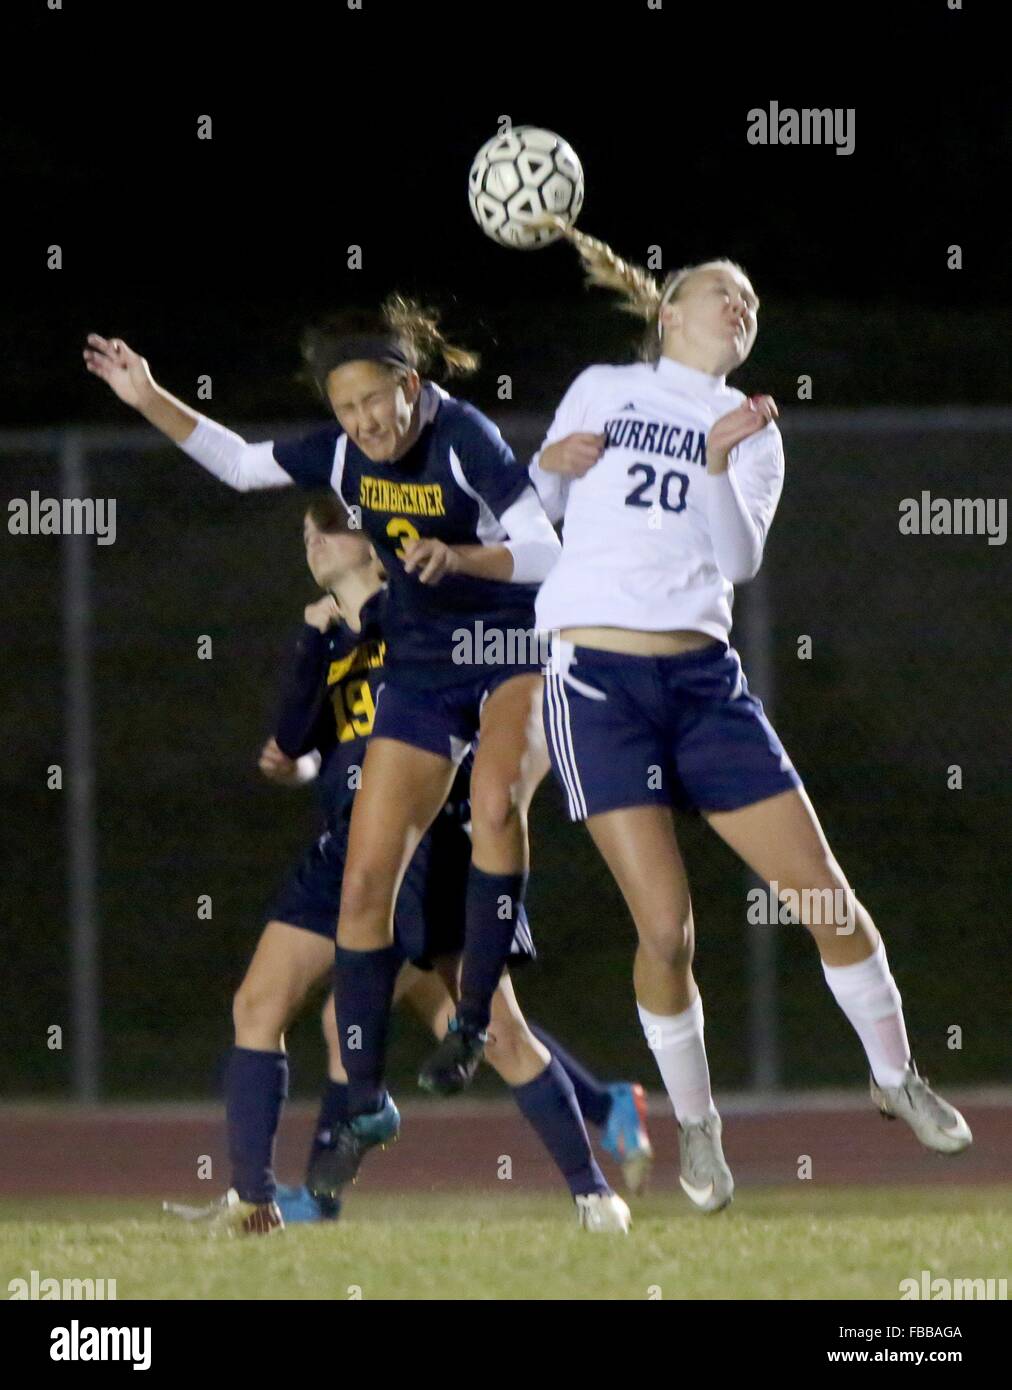 Palm Harbor, Florida, USA. 13th Jan, 2016. DOUGLAS R. CLIFFORD | Times.Steinbrenner High School's Claire Morrison (3), left, battles with Palm Harbor University High School's Ashley Thomas (20) for possession of the ball during Wednesday's (1/13/16) girls soccer: 5A-7 district tournament at Palm Harbor. © Douglas R. Clifford/Tampa Bay Times/ZUMA Wire/Alamy Live News Stock Photo